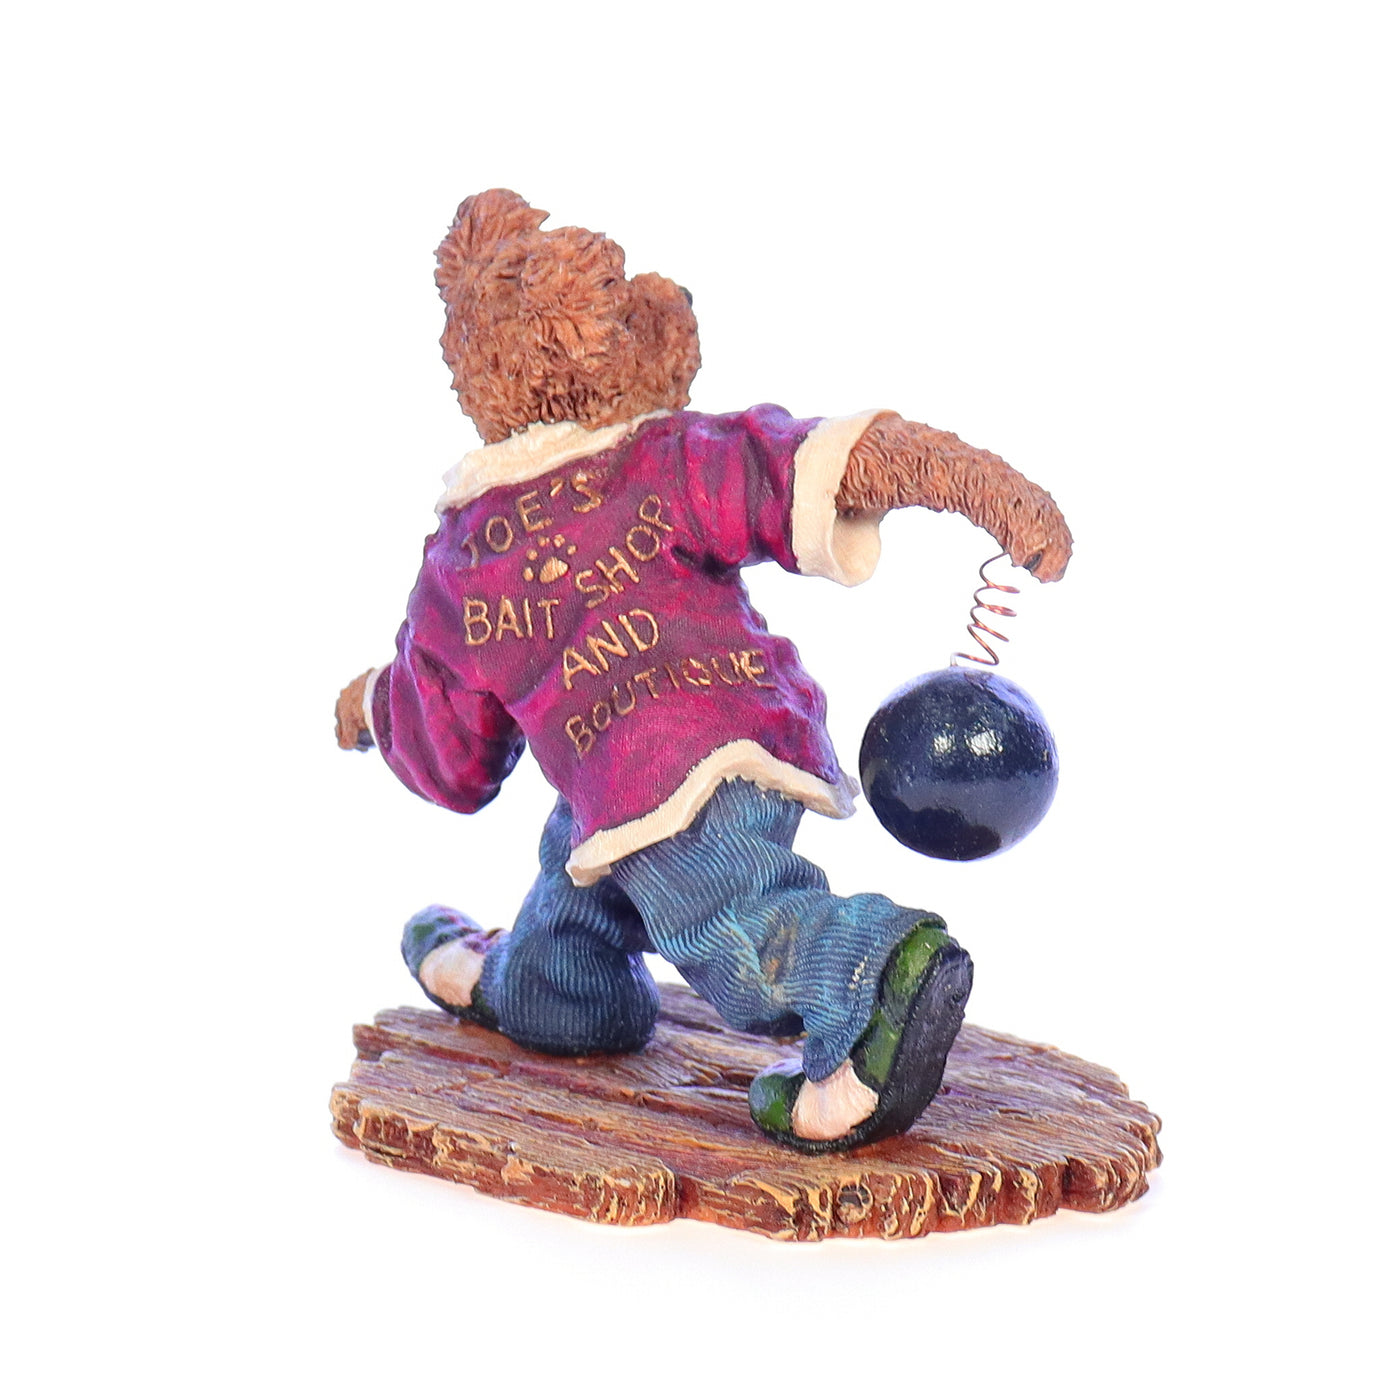 the bearstone collection 228358 strike mcspare  9 outa 10 aint bad sports figurine 2001 back right